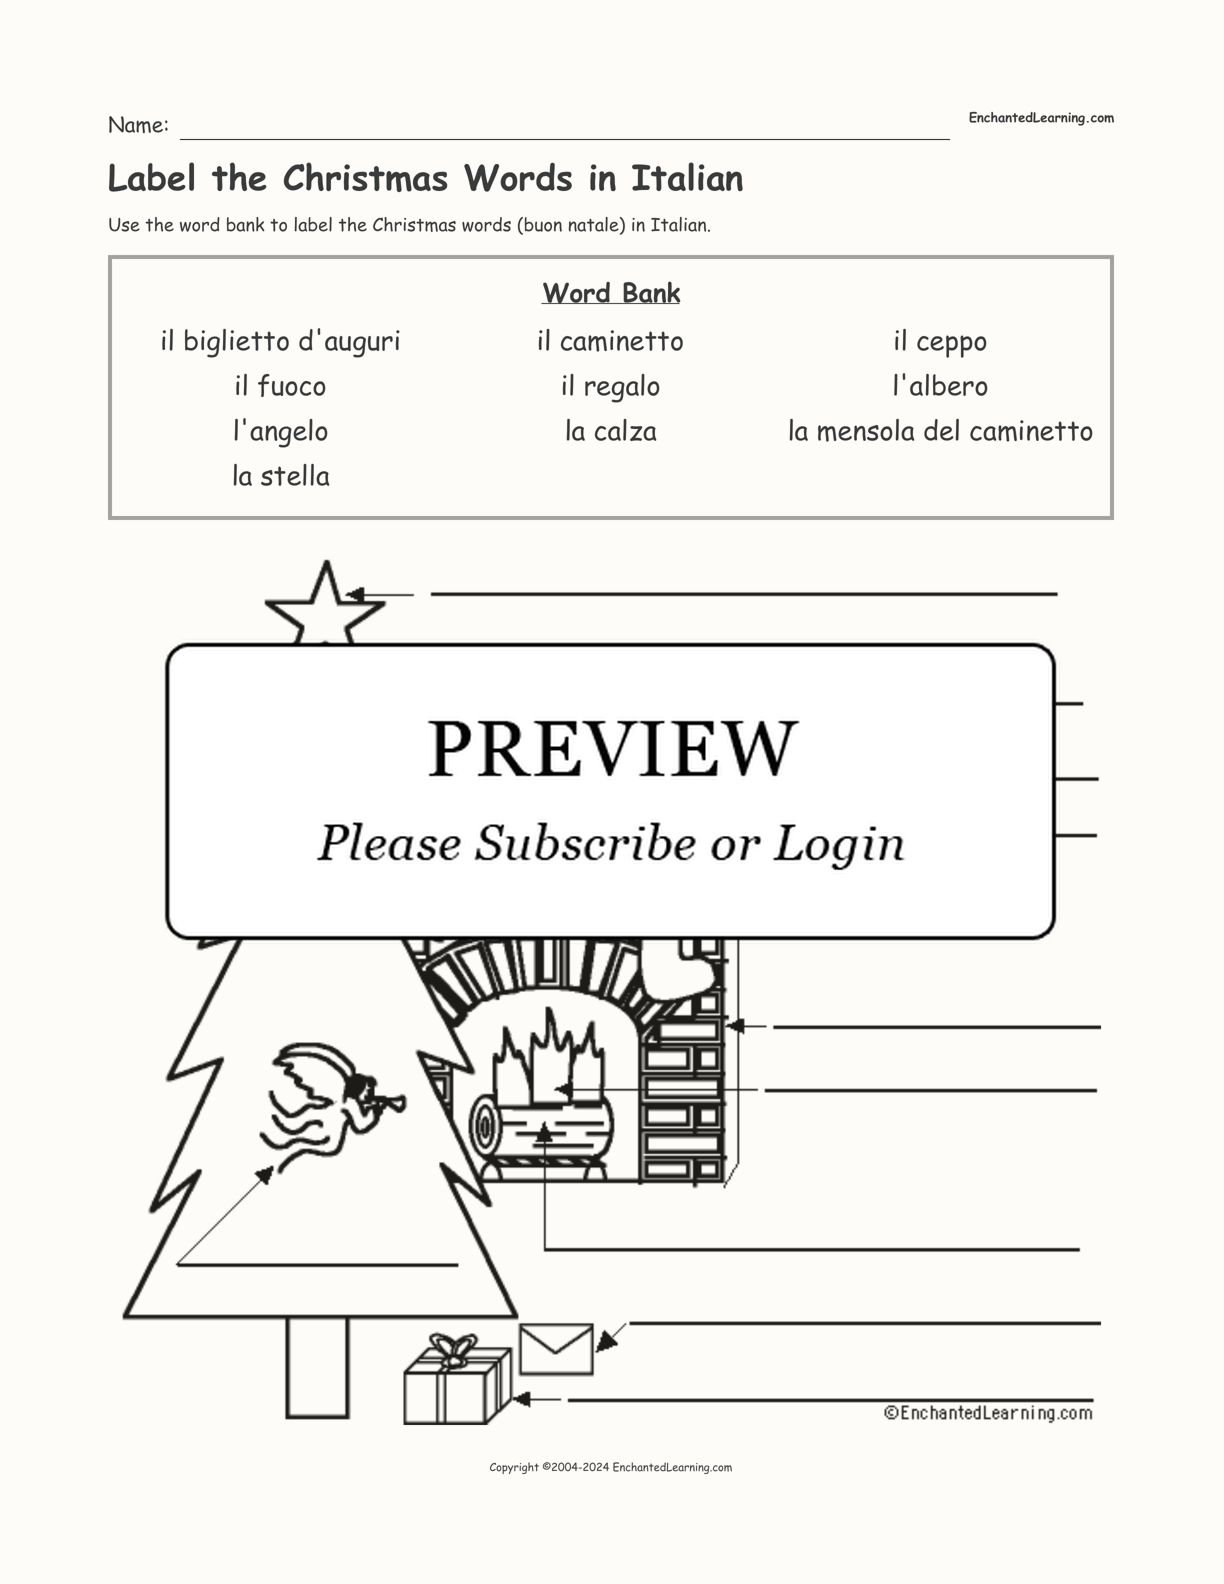 Label the Christmas Words in Italian interactive worksheet page 1